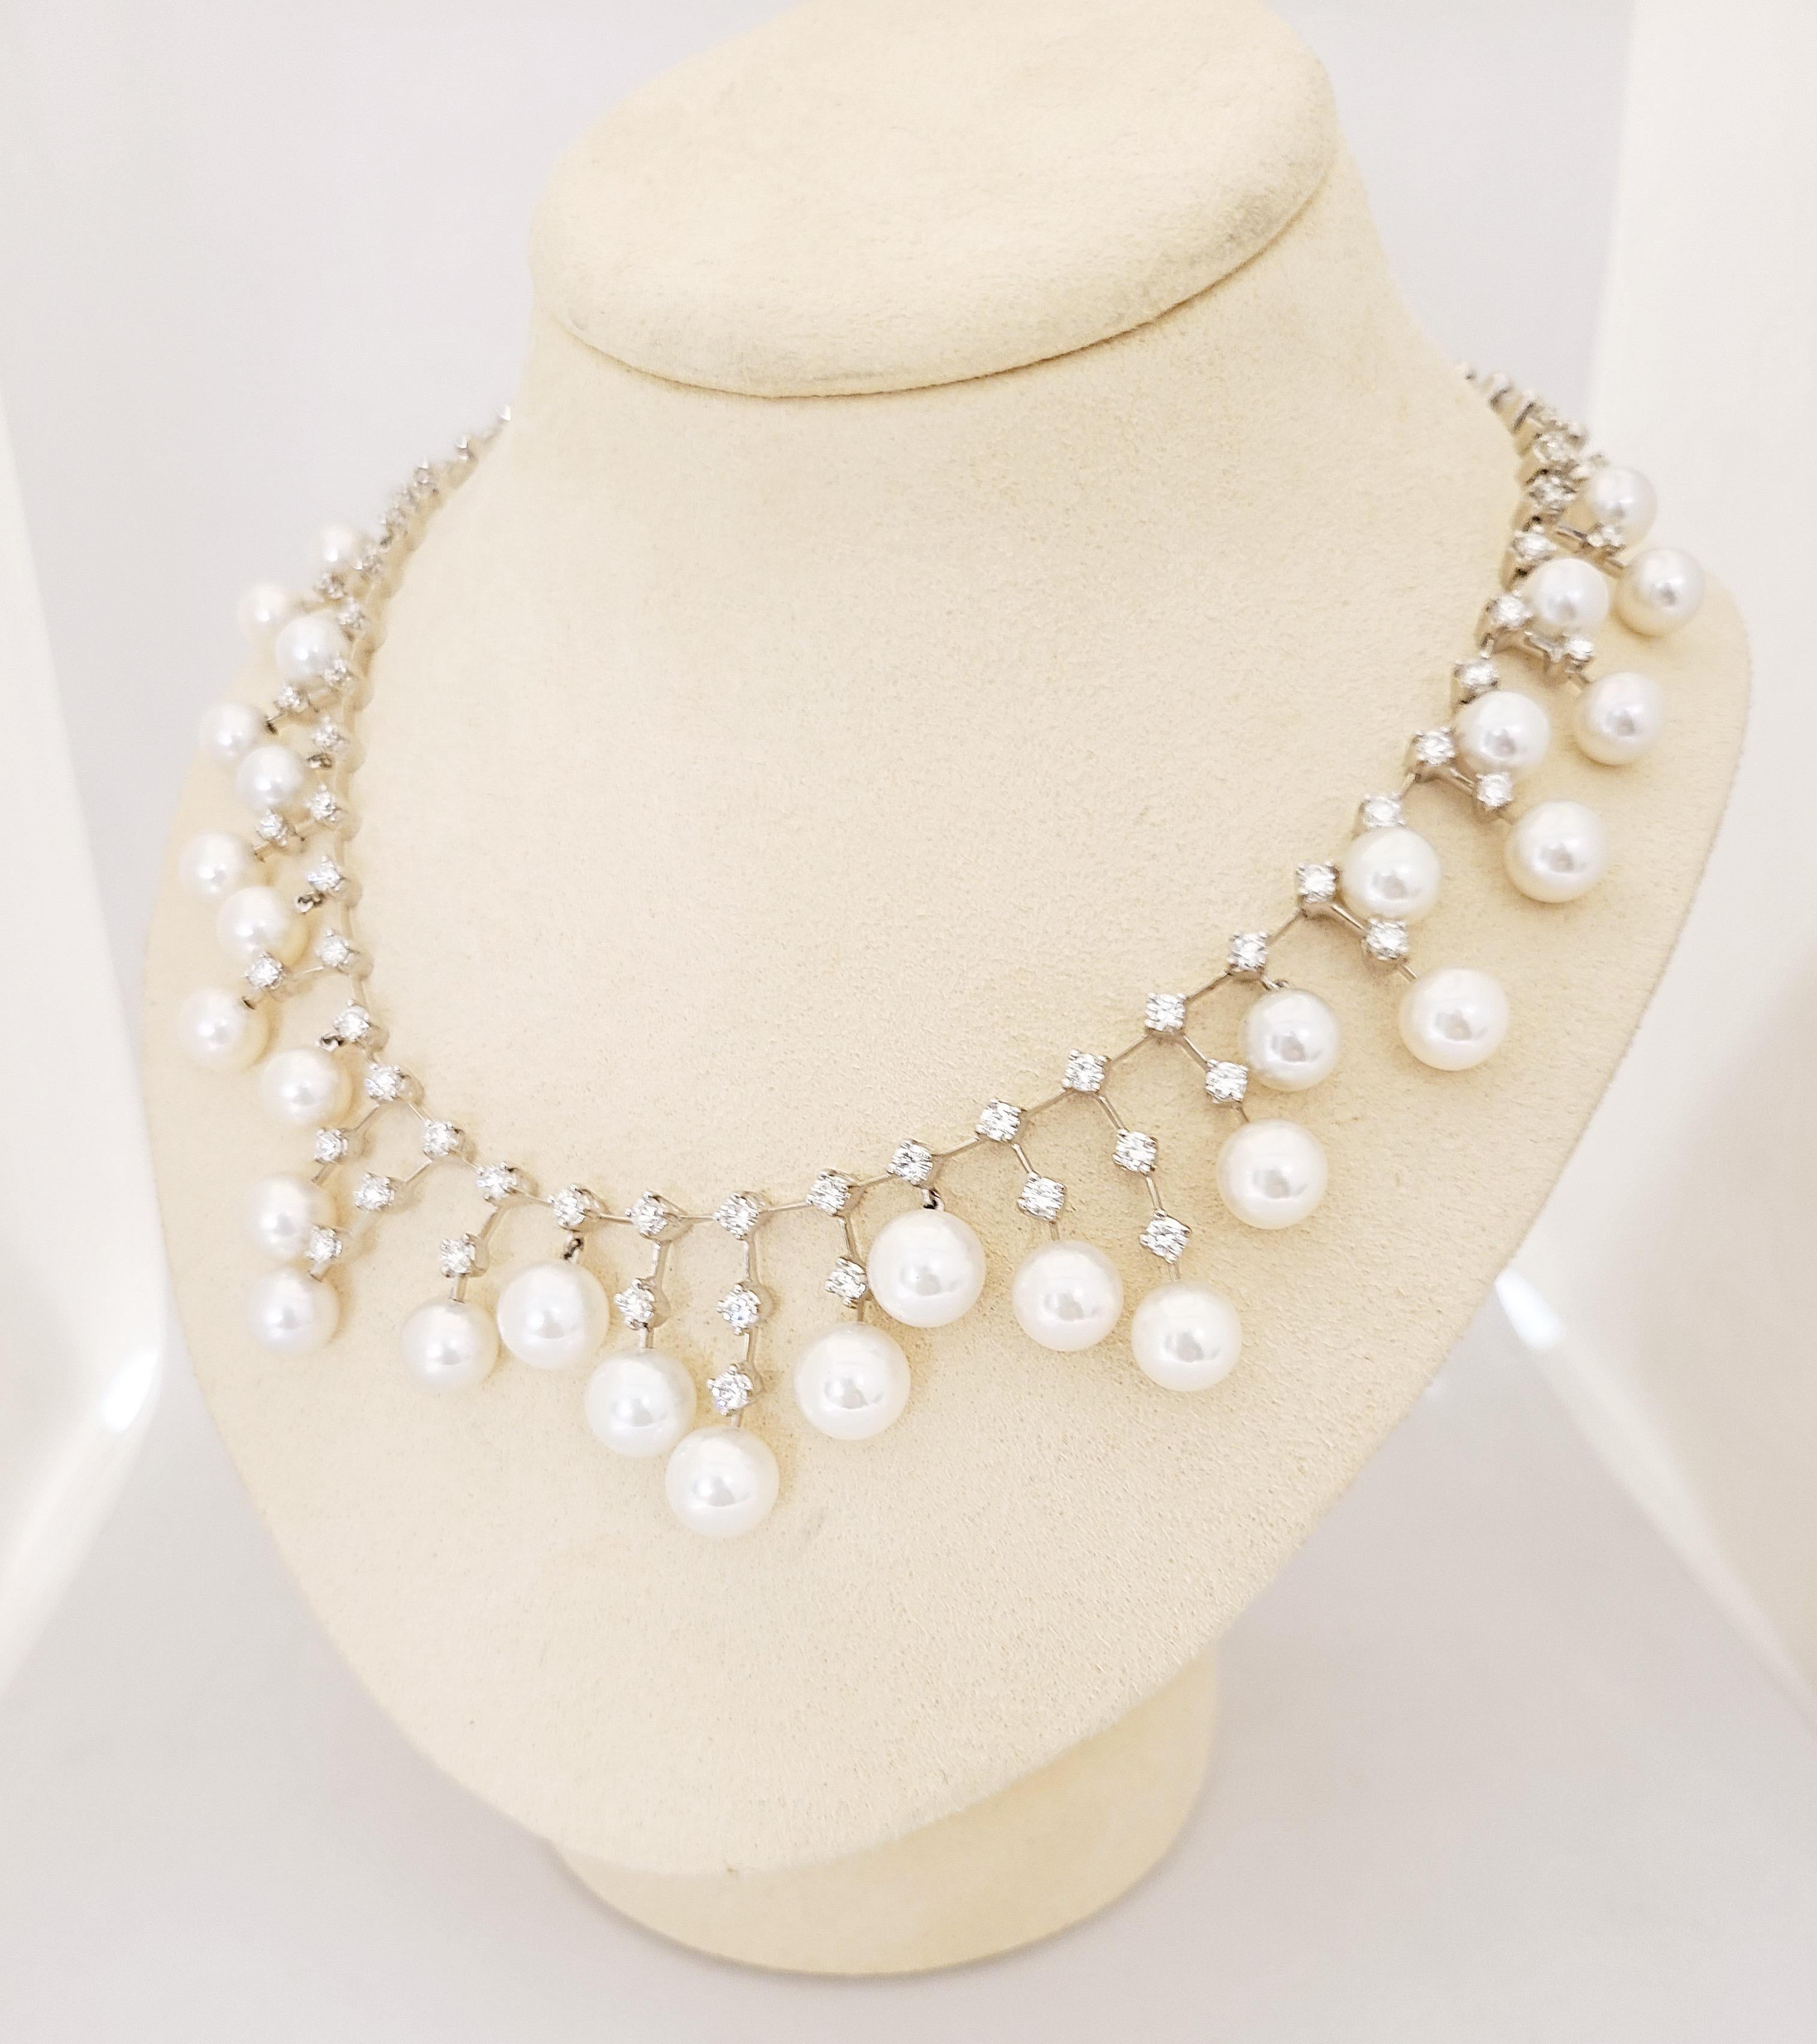 Modern Stephan Hafner 18 Karat White Gold Necklace with 4.04 Carat Diamonds and Pearls For Sale